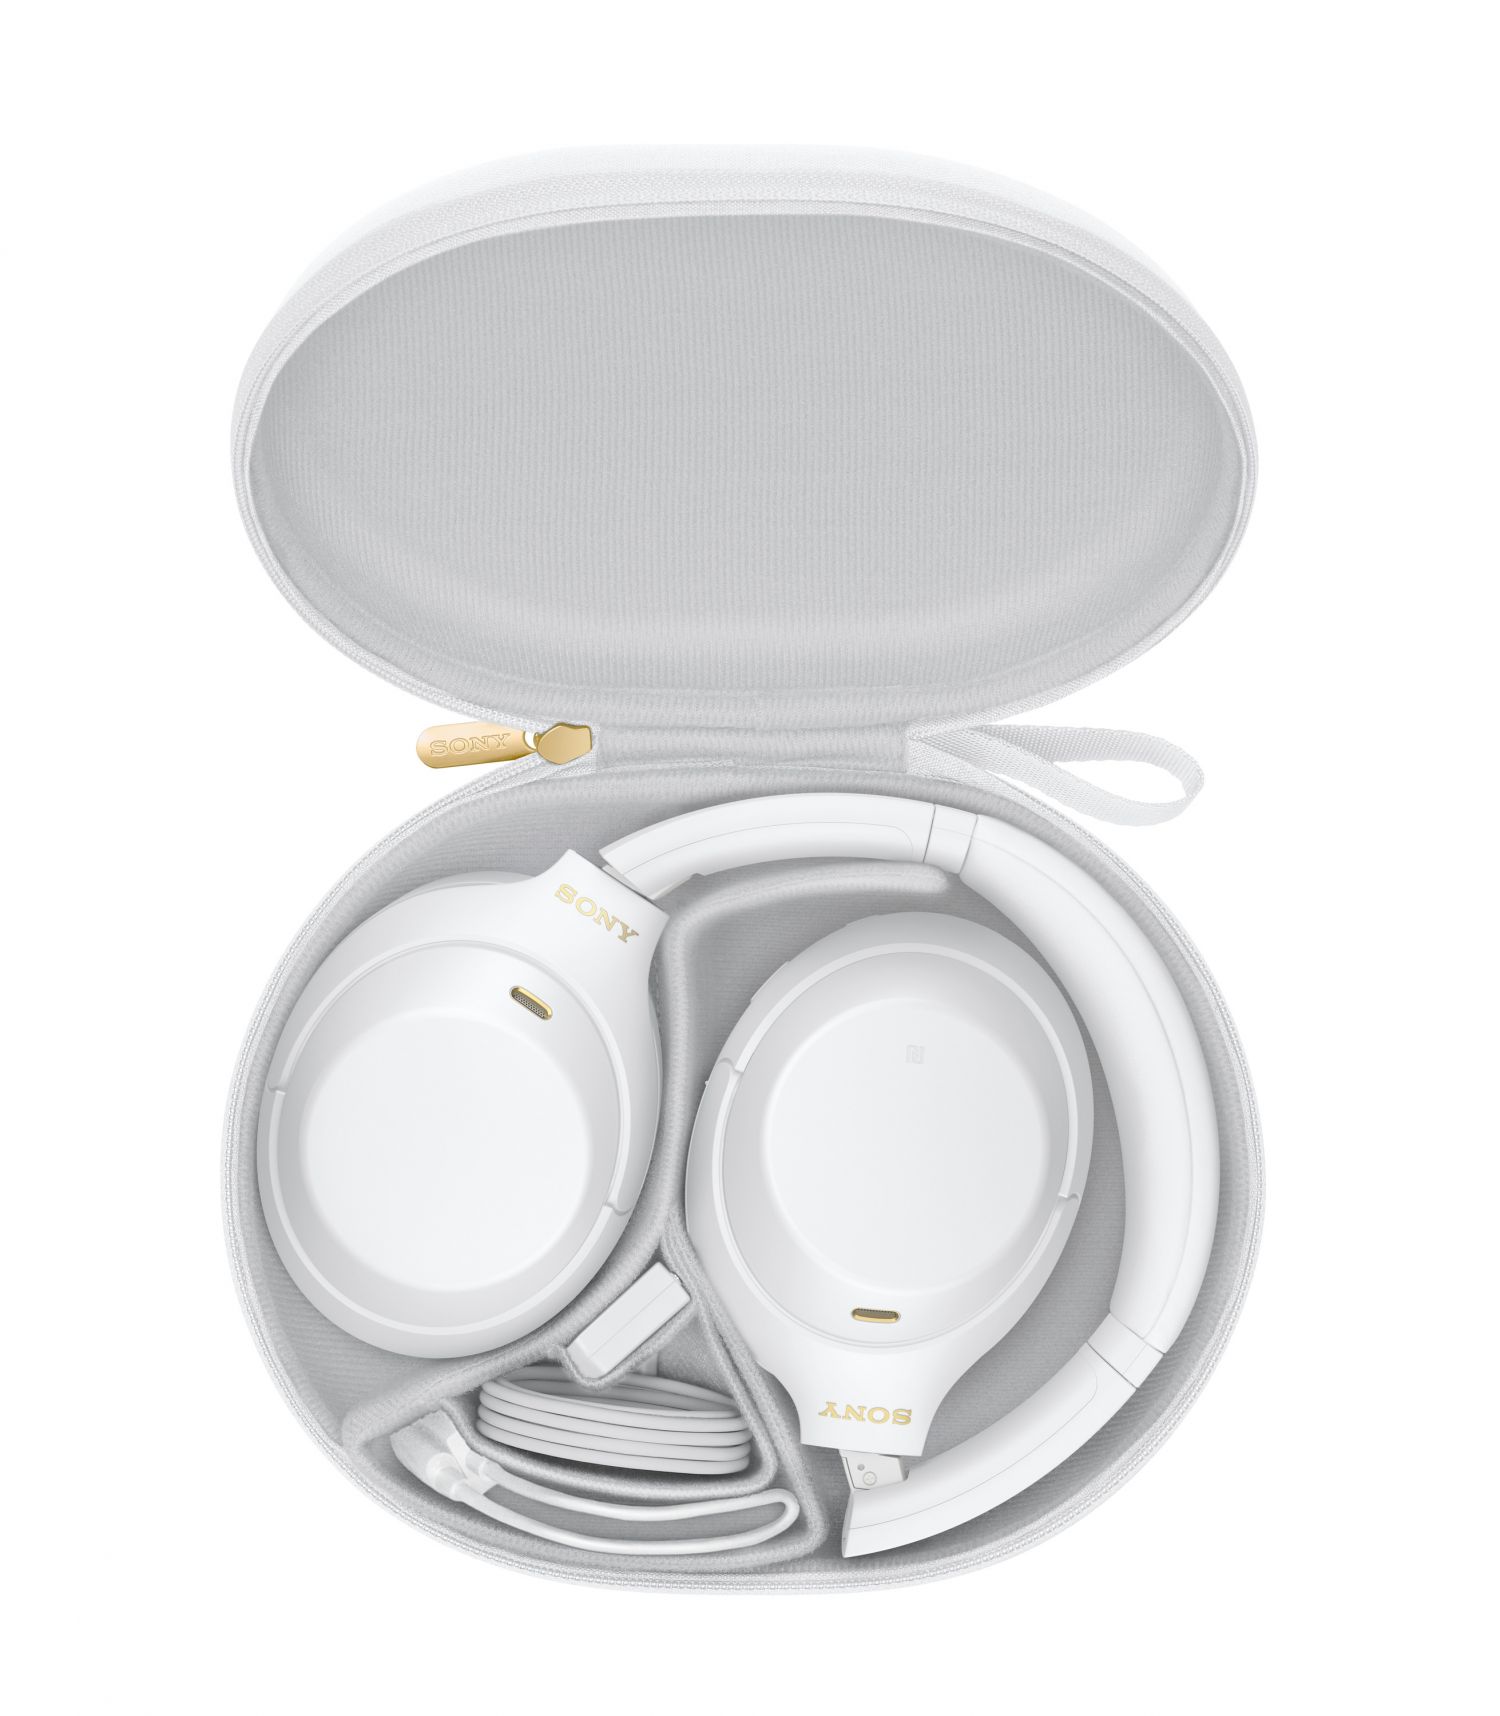 Sony Launches New Limited Edition Silent White WHXM4 In